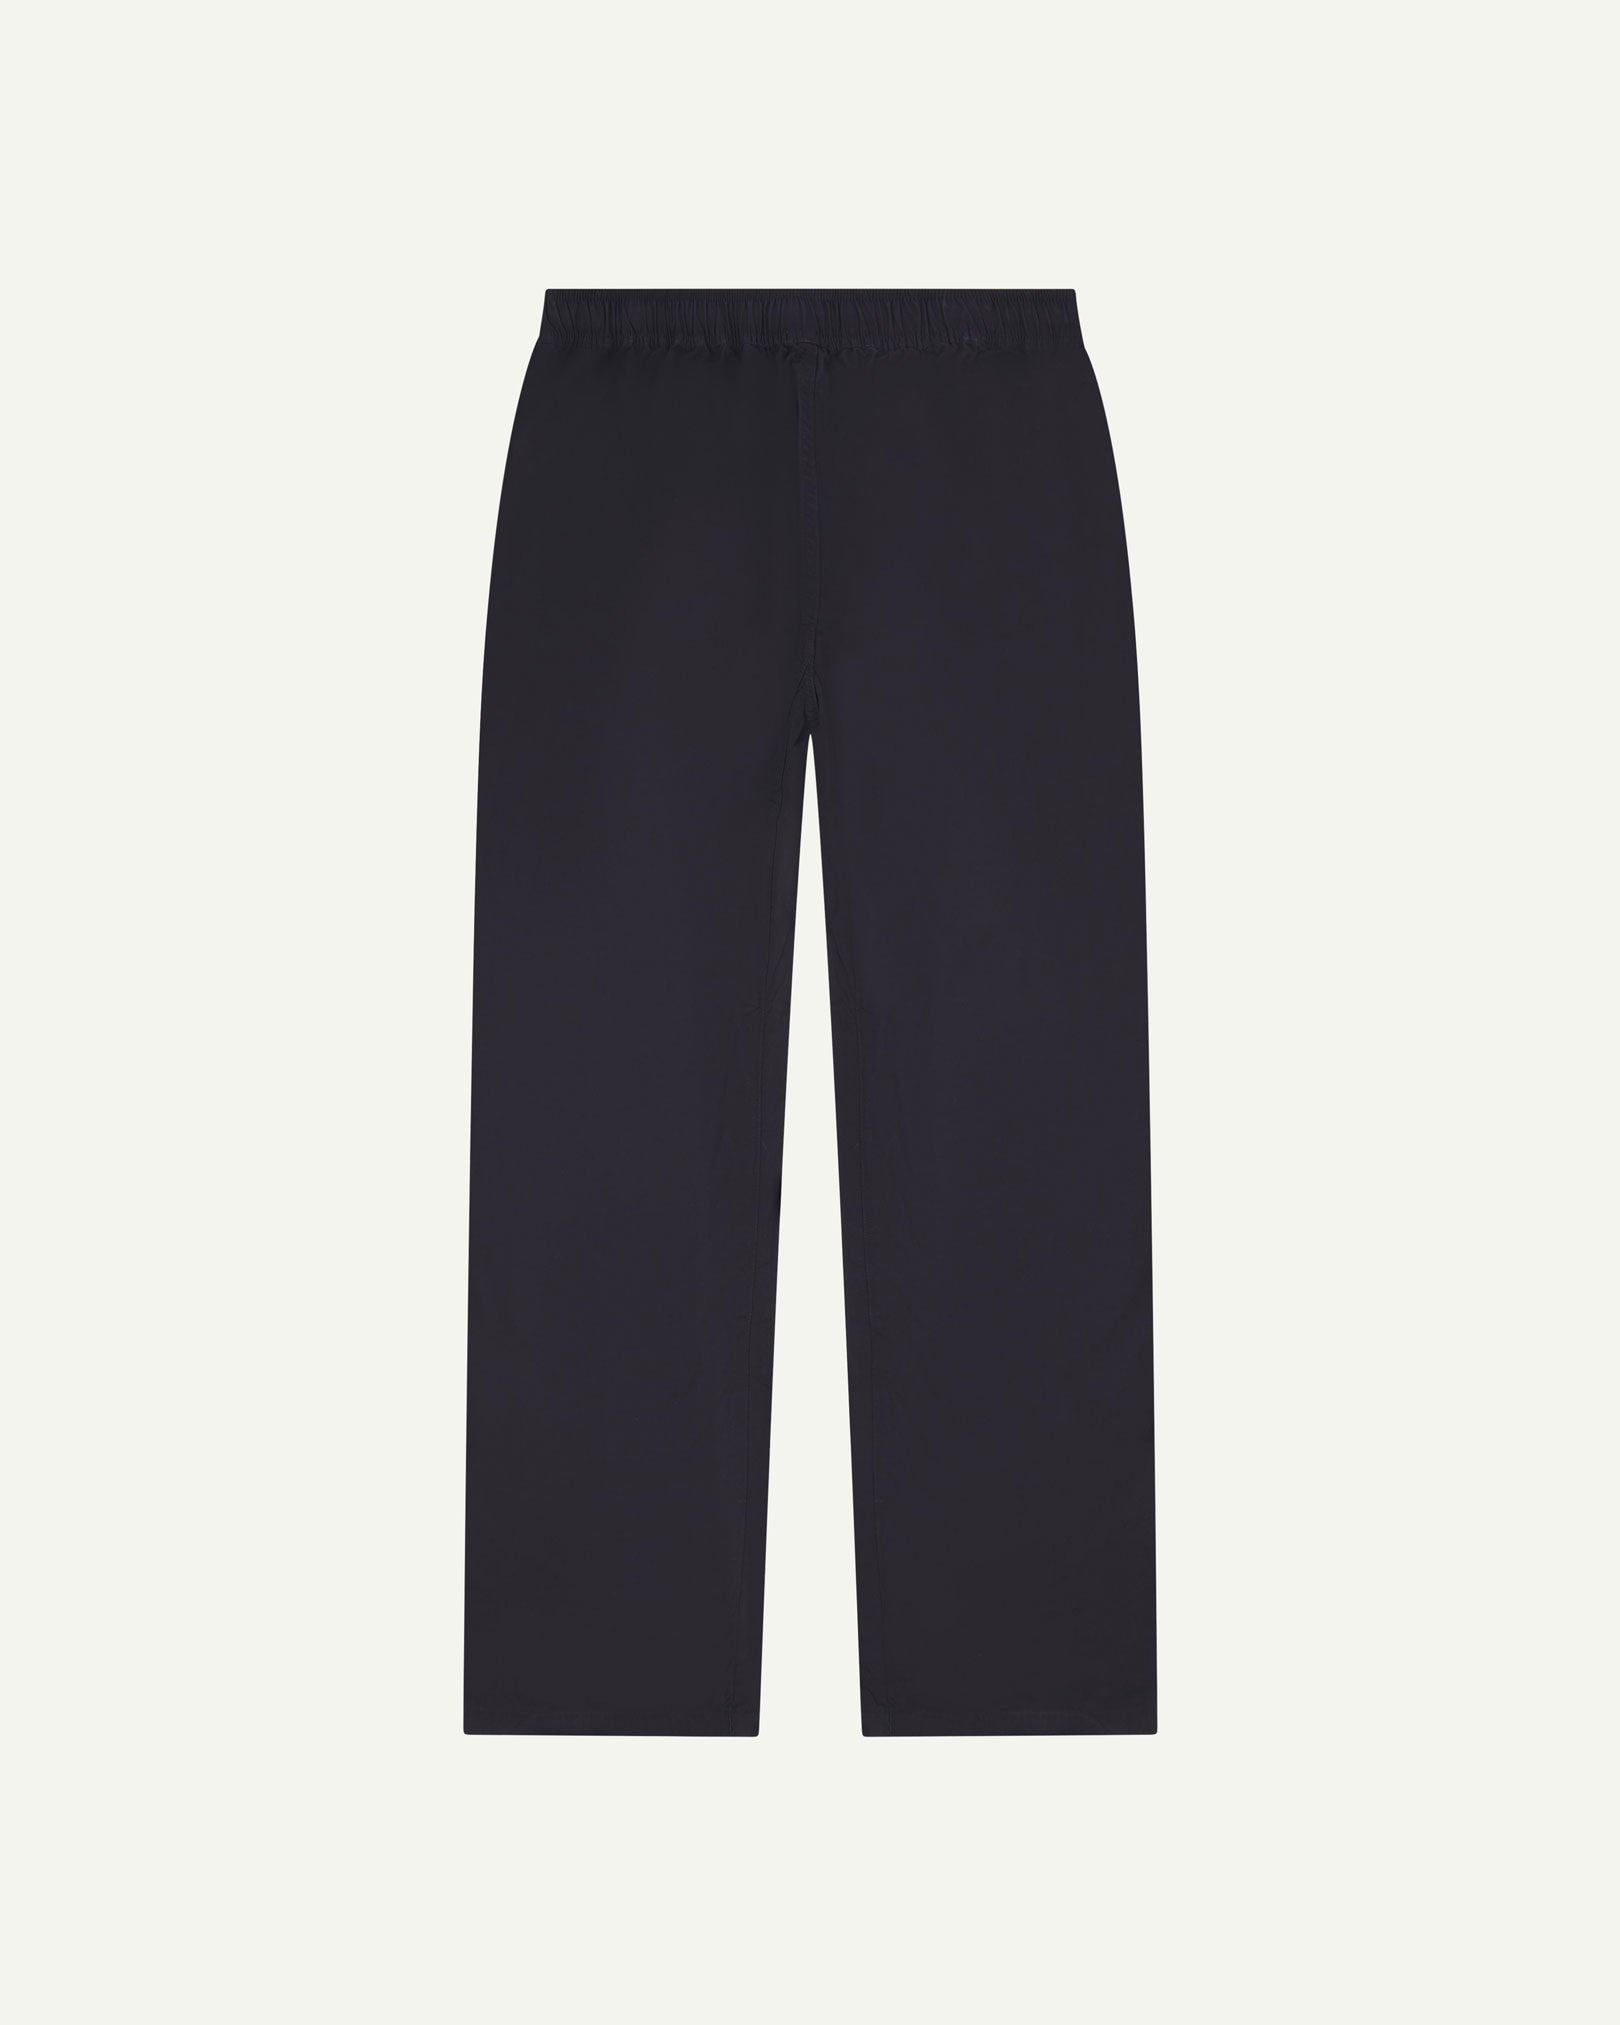 Flat back shot of the Uskees 5020 lightweight utility pants in midnight blue showing drawstring waist and slighly tapered cut.